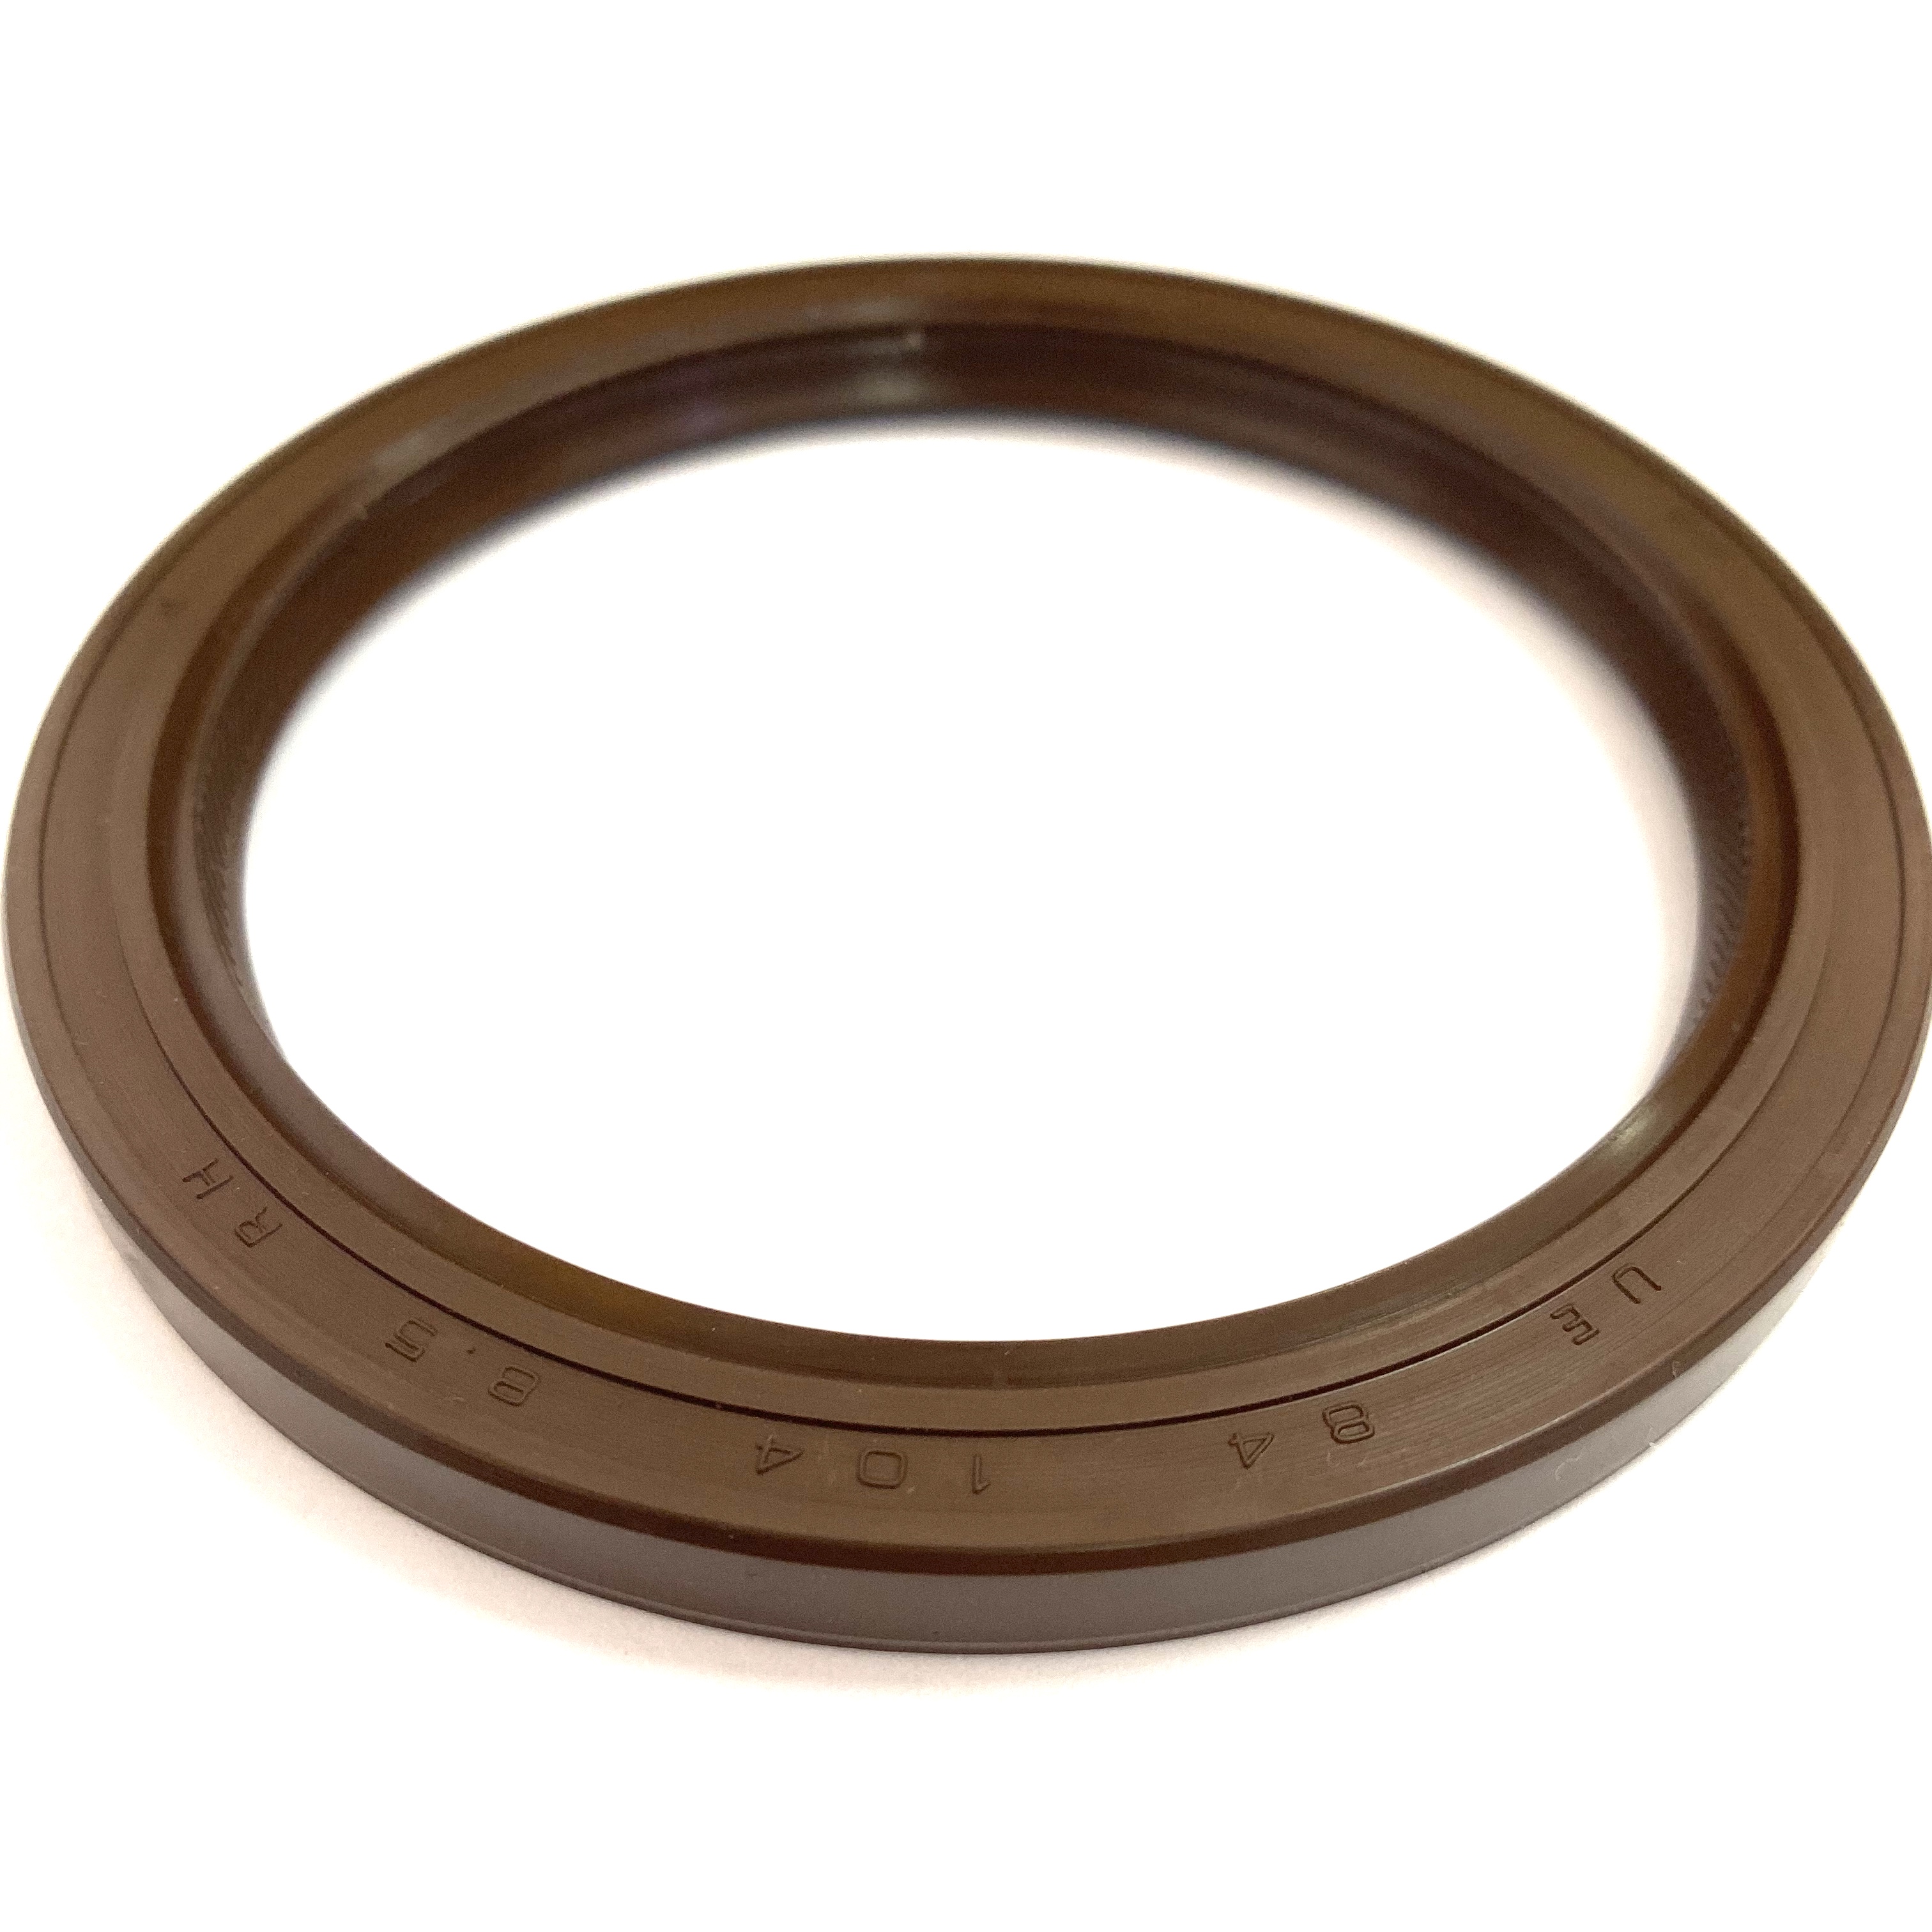 Oil seal Crankshaft seal Crankshaft oil seal Size84*104*8.5 OEM12279-AD205 auto parts for NIS S AN